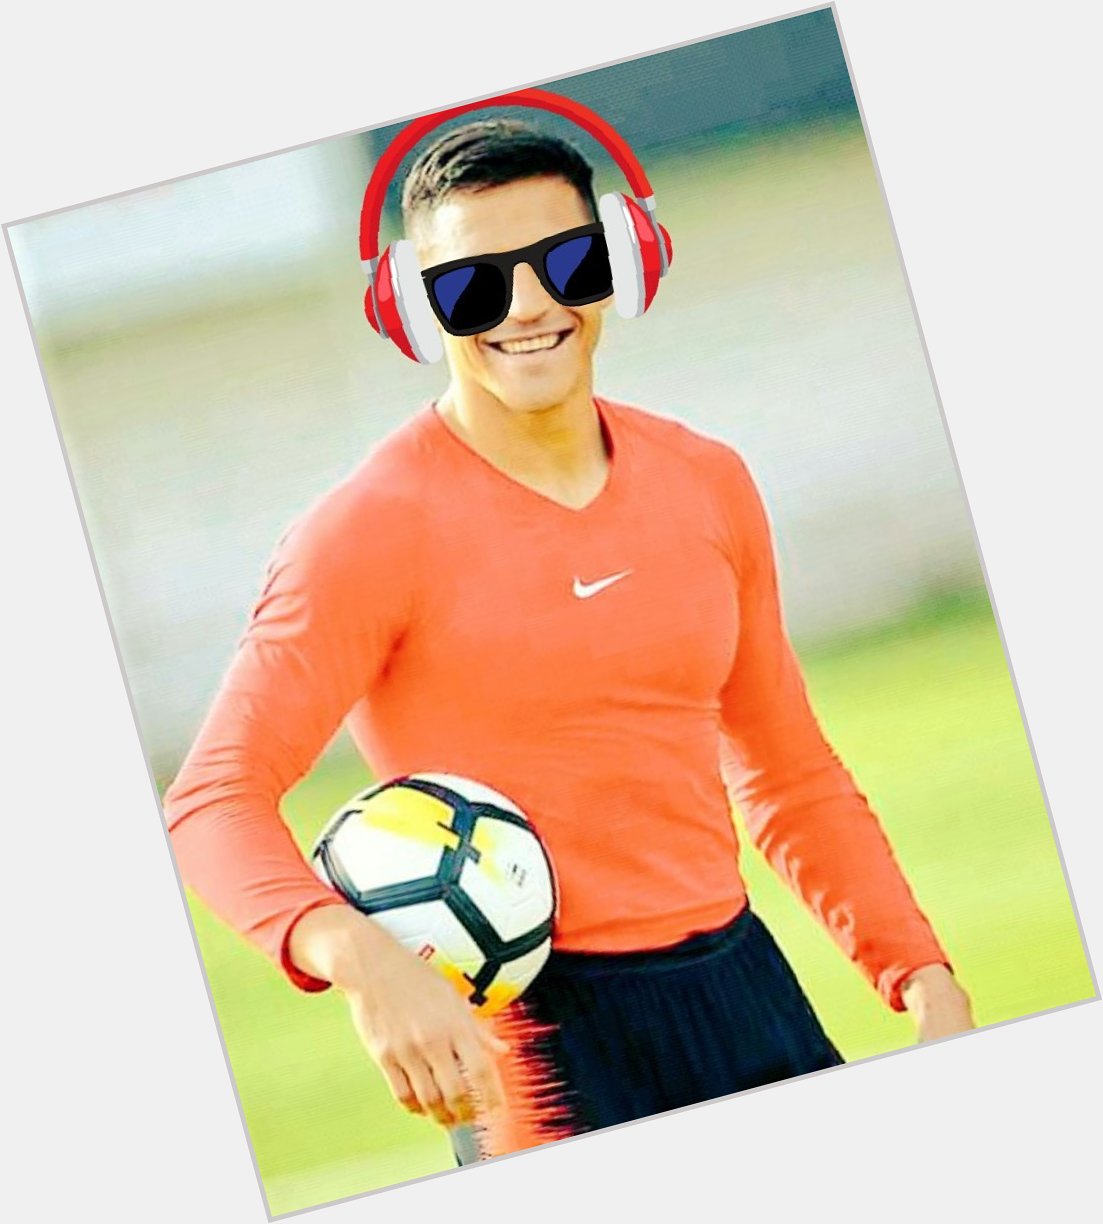 Happy Birthday Alexis Sanchez Hopefully long life, healthy always and more handsome. 